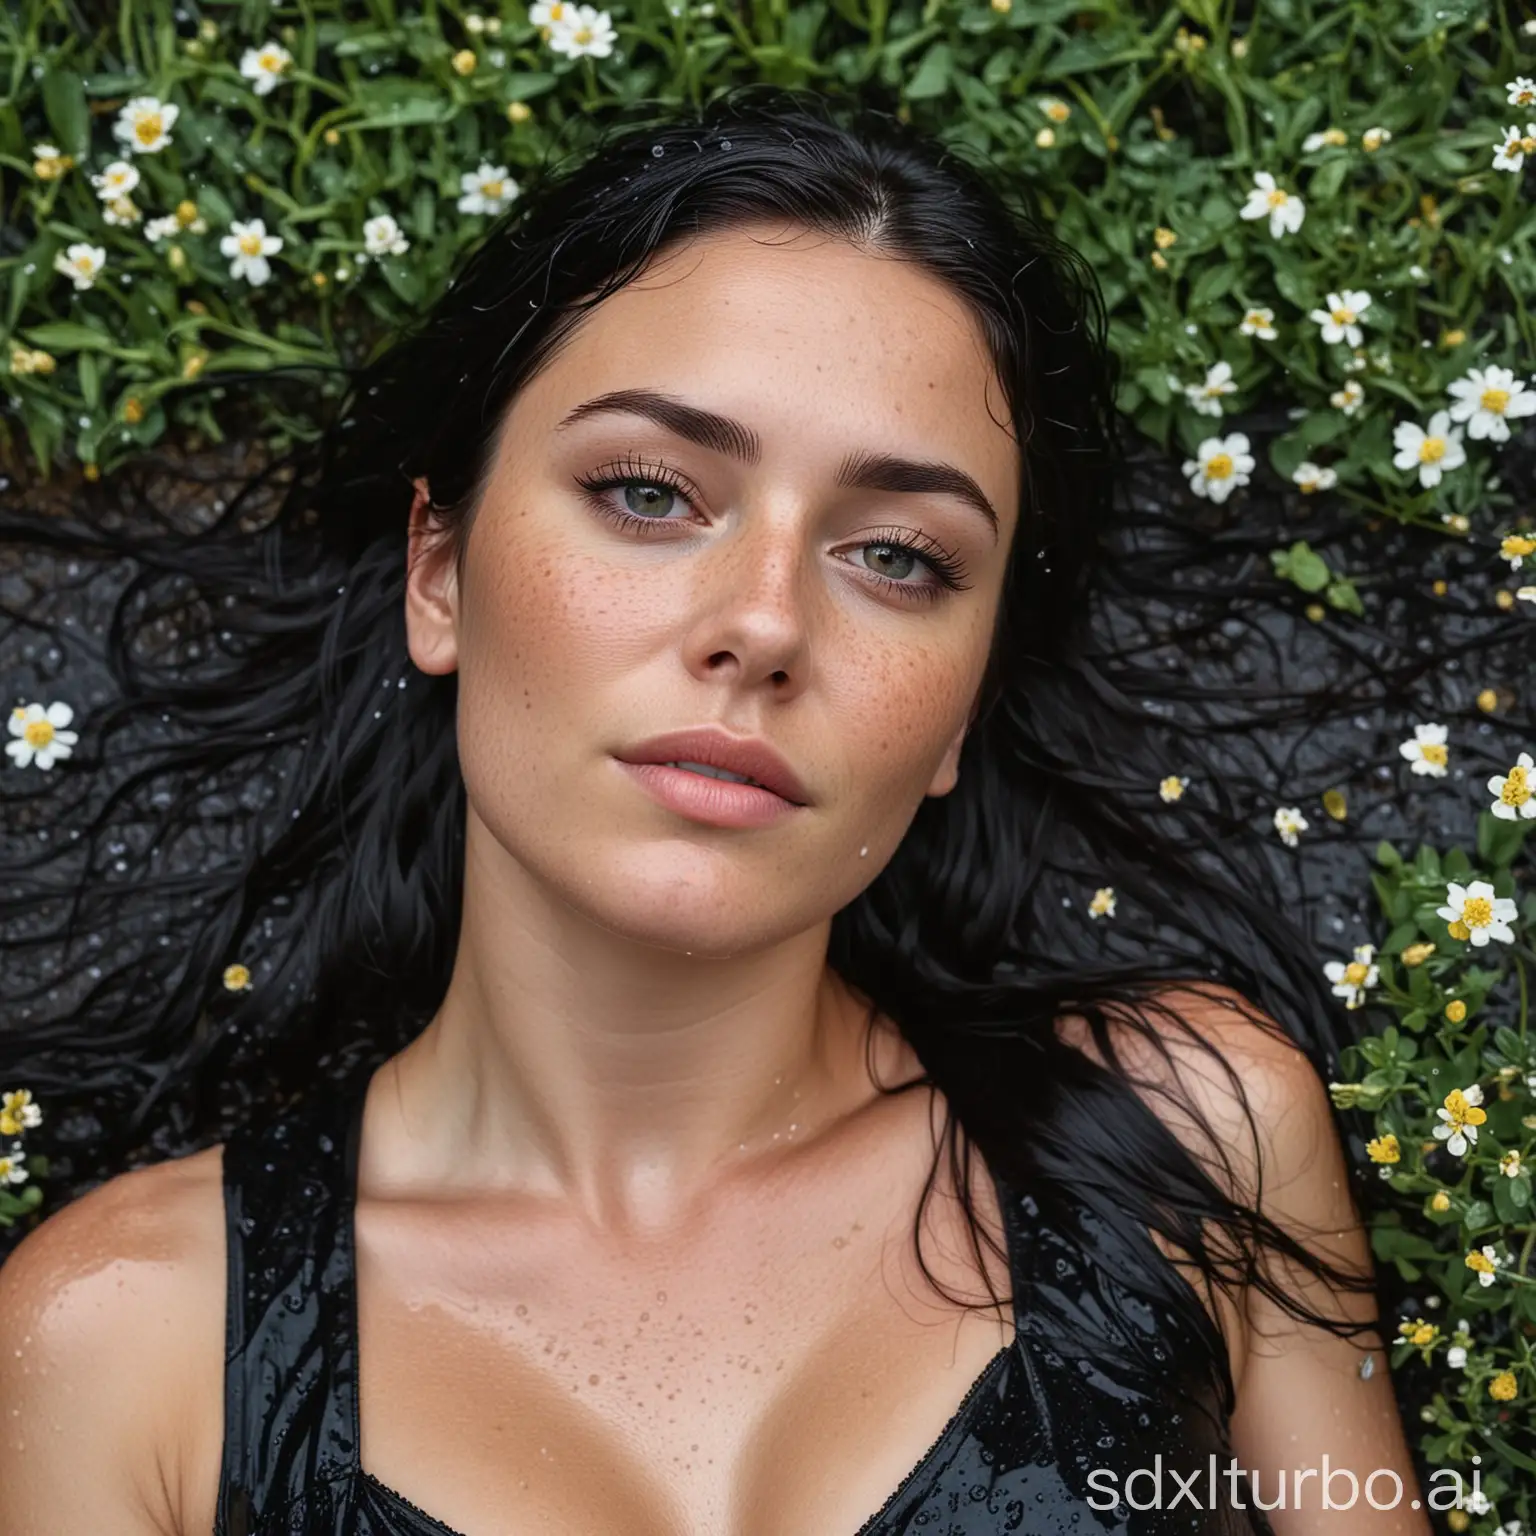 30 year old girl with dark hair, deep gaze, freckles, lying among the flowers while it rains, wet black dress and wet hair